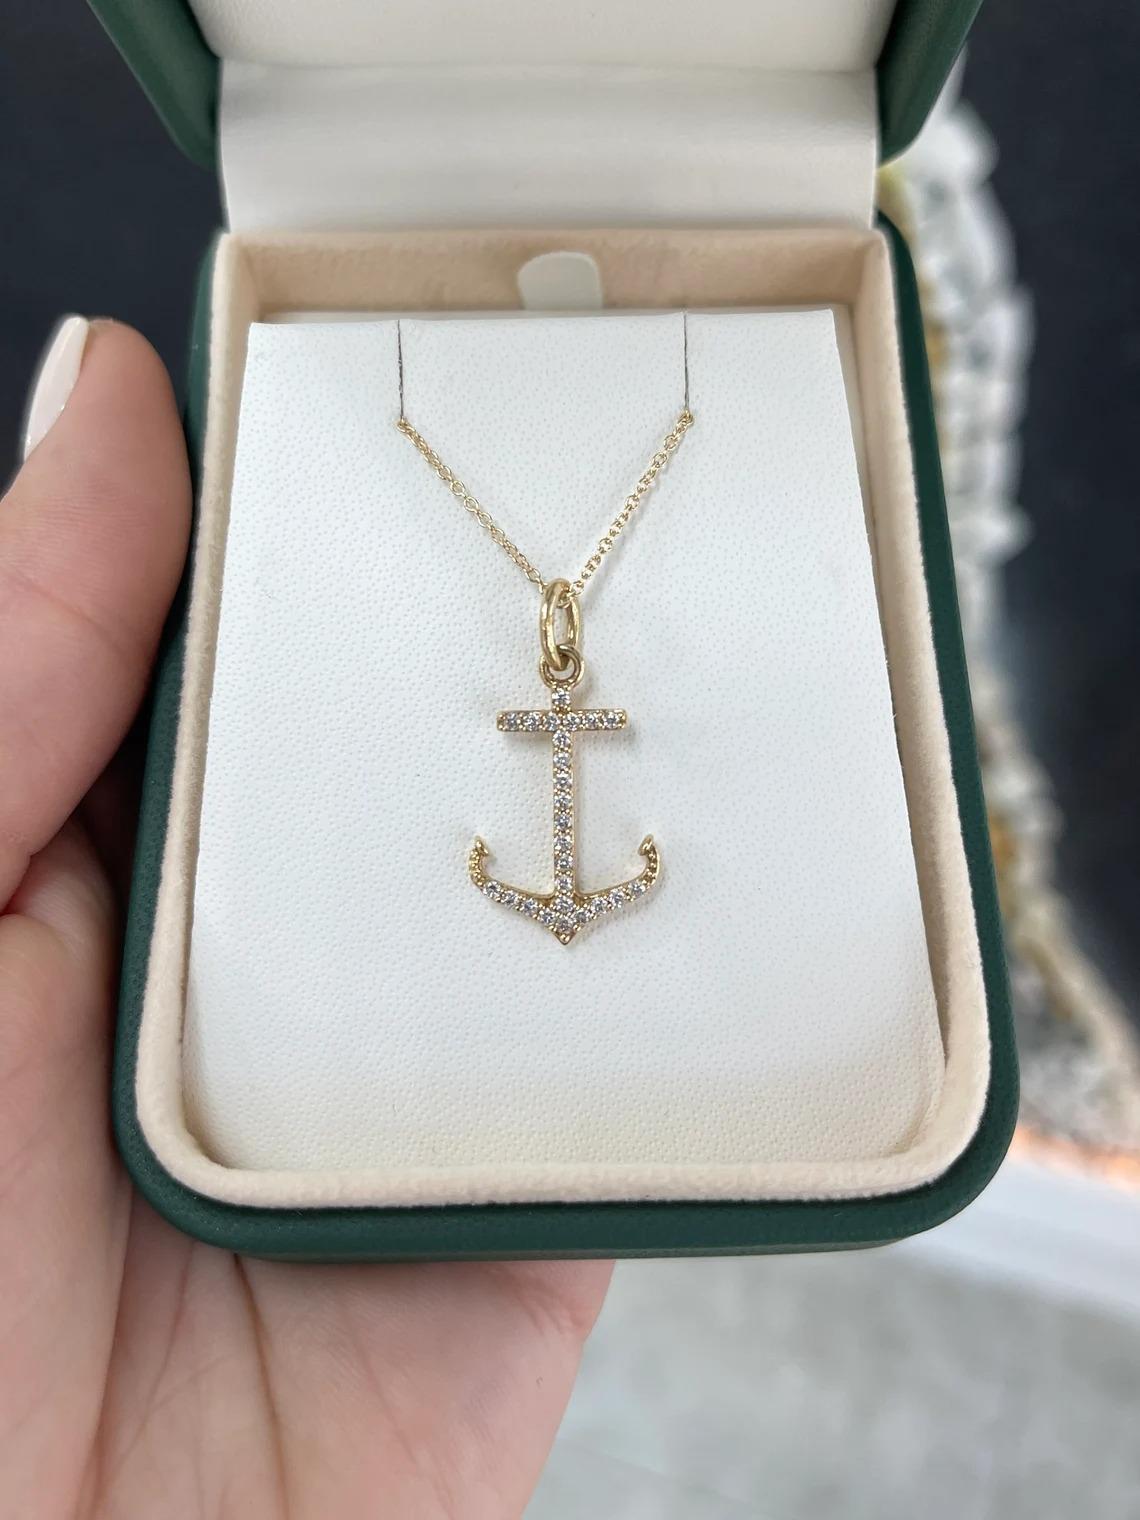 A gorgeous diamond anchor pendant in 14K yellow gold. This magical piece features twenty-five brilliant round-cut diamonds that go within the outline of the anchor and make it fully 